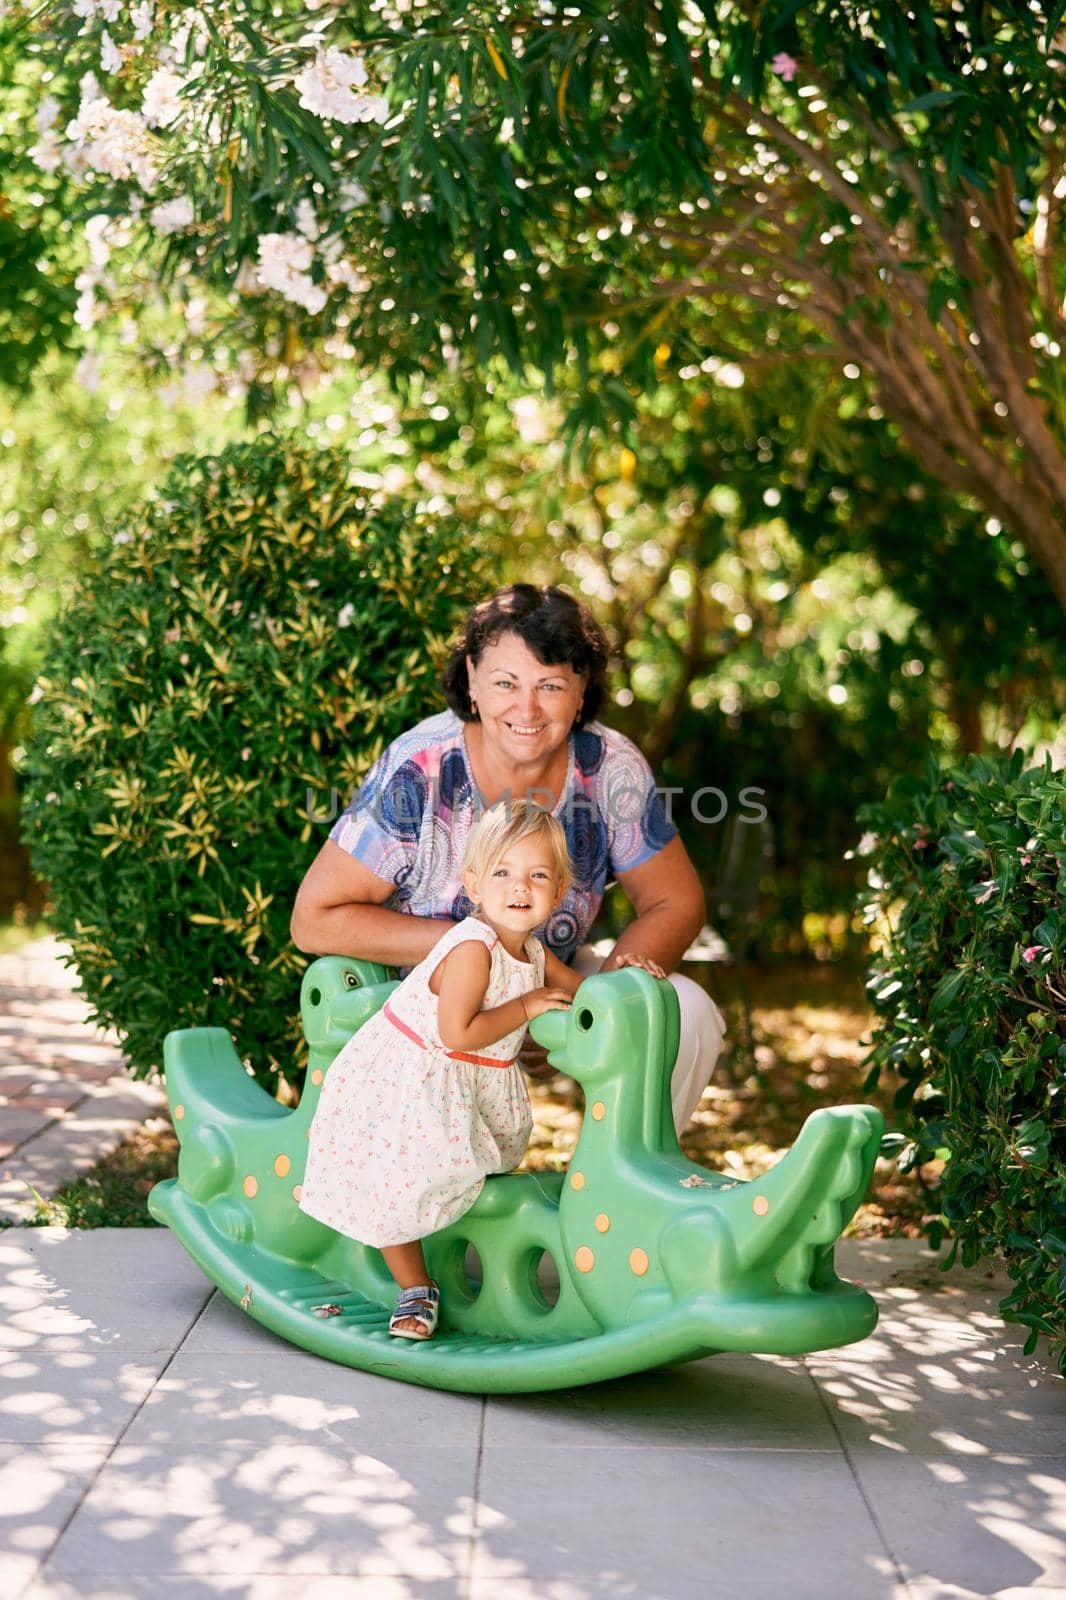 Grandmother squatted near a little girl on a teeter-totter in the green park. High quality photo